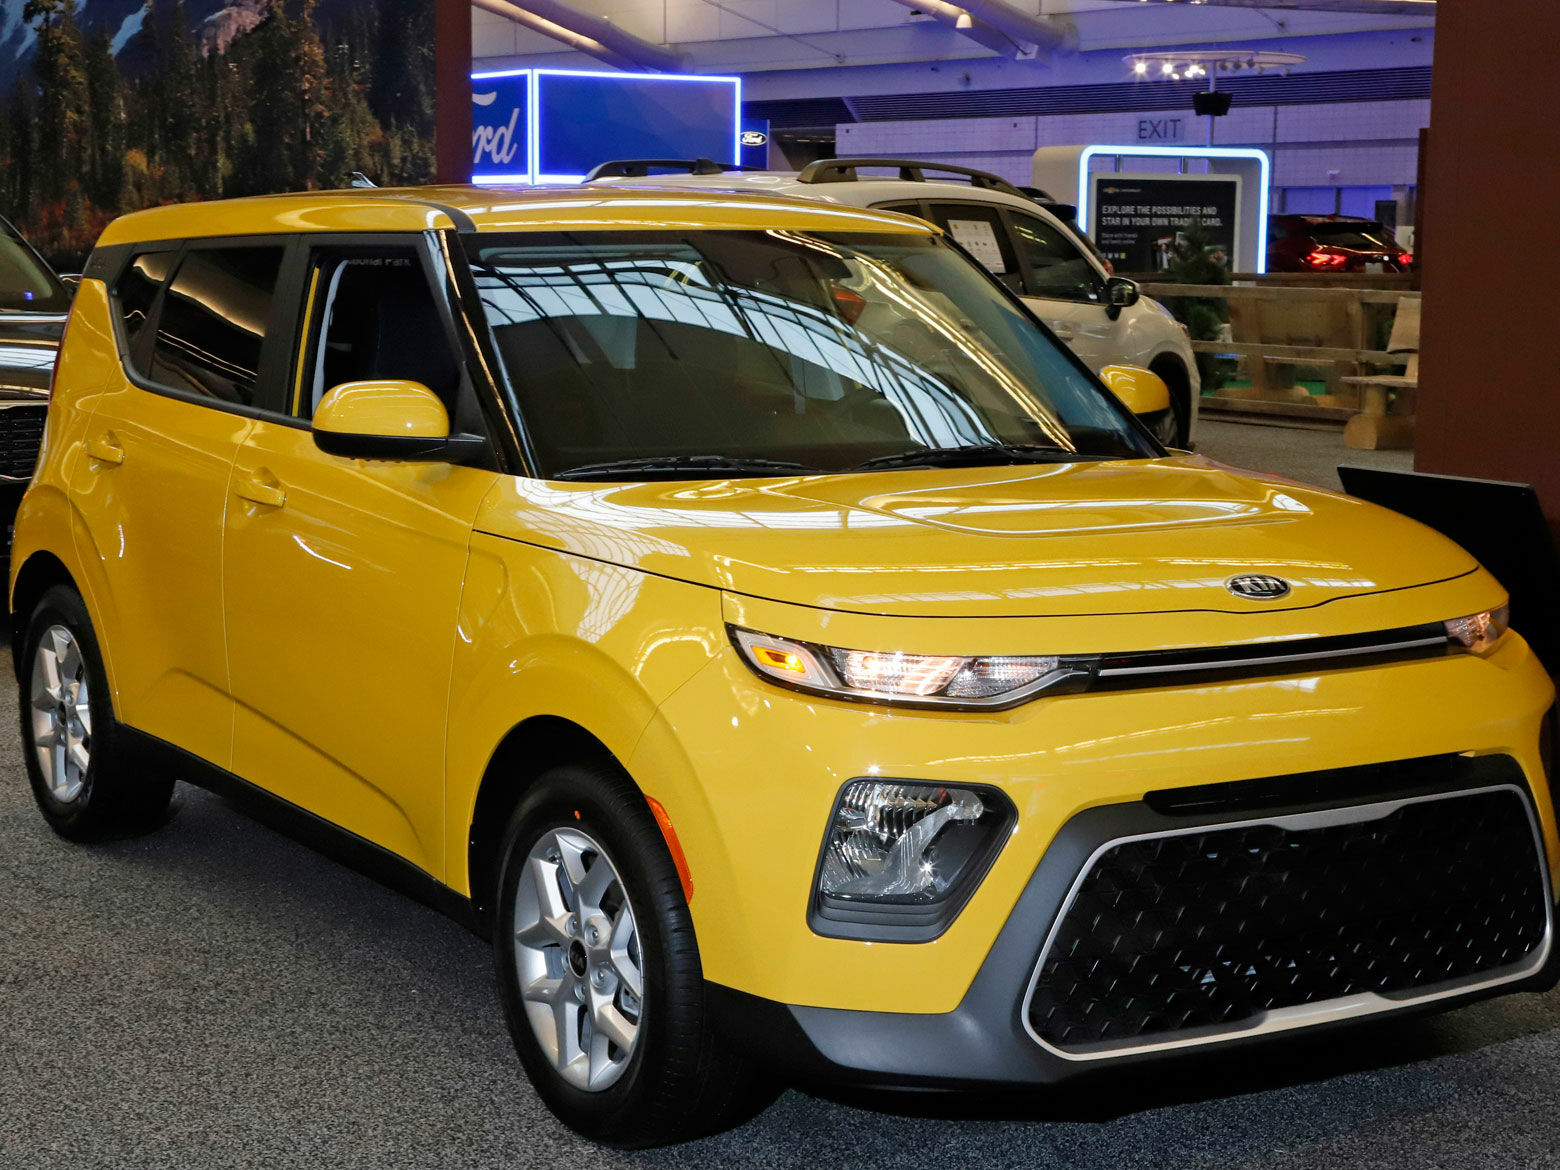 <h3><strong>2020 Kia Soul</strong></h3>
<p><strong>Lease Deal: As low as $149 per month for 24 months with as little as $2,419 due at signing</strong></p>
<p>Depending on where you live, you can lease a <a href="https://cars.usnews.com/cars-trucks/kia/soul">2020 Kia Soul</a> this Fourth of July with payments ranging from $149 to $179 per month, with $2,919 due at signing. If you’re trading in another vehicle or ending a lease, Kia will knock another $500 off the amount you have to pay at lease signing.</p>
<p>The 2020 Soul is one of the highest-rated vehicles in our <a href="https://cars.usnews.com/cars-trucks/rankings/subcompact-suvs">subcompact SUV ranking</a>. It is the winner of our 2020 <a href="https://cars.usnews.com/cars-trucks/best-cars-for-the-money">Best Subcompact SUV for the Money</a> honor and was a <a href="https://cars.usnews.com/cars-trucks/best-cars-for-teens">2019 Best Cars for Teens</a> award winner.</p>
<p>Its boxy hatchback design creates a large cabin with plentiful cargo space. The standard infotainment setup in the LX model included in the lease deal features a 7-inch touch screen plus support for Apple CarPlay and Android Auto. The Soul LX is powered by a 147-horsepower four-cylinder engine matched to a six-speed manual transmission.</p>
<p>There’s a mileage cap of 24,000 miles on the lease deal, which is only available to shoppers with qualifying credit.</p>
